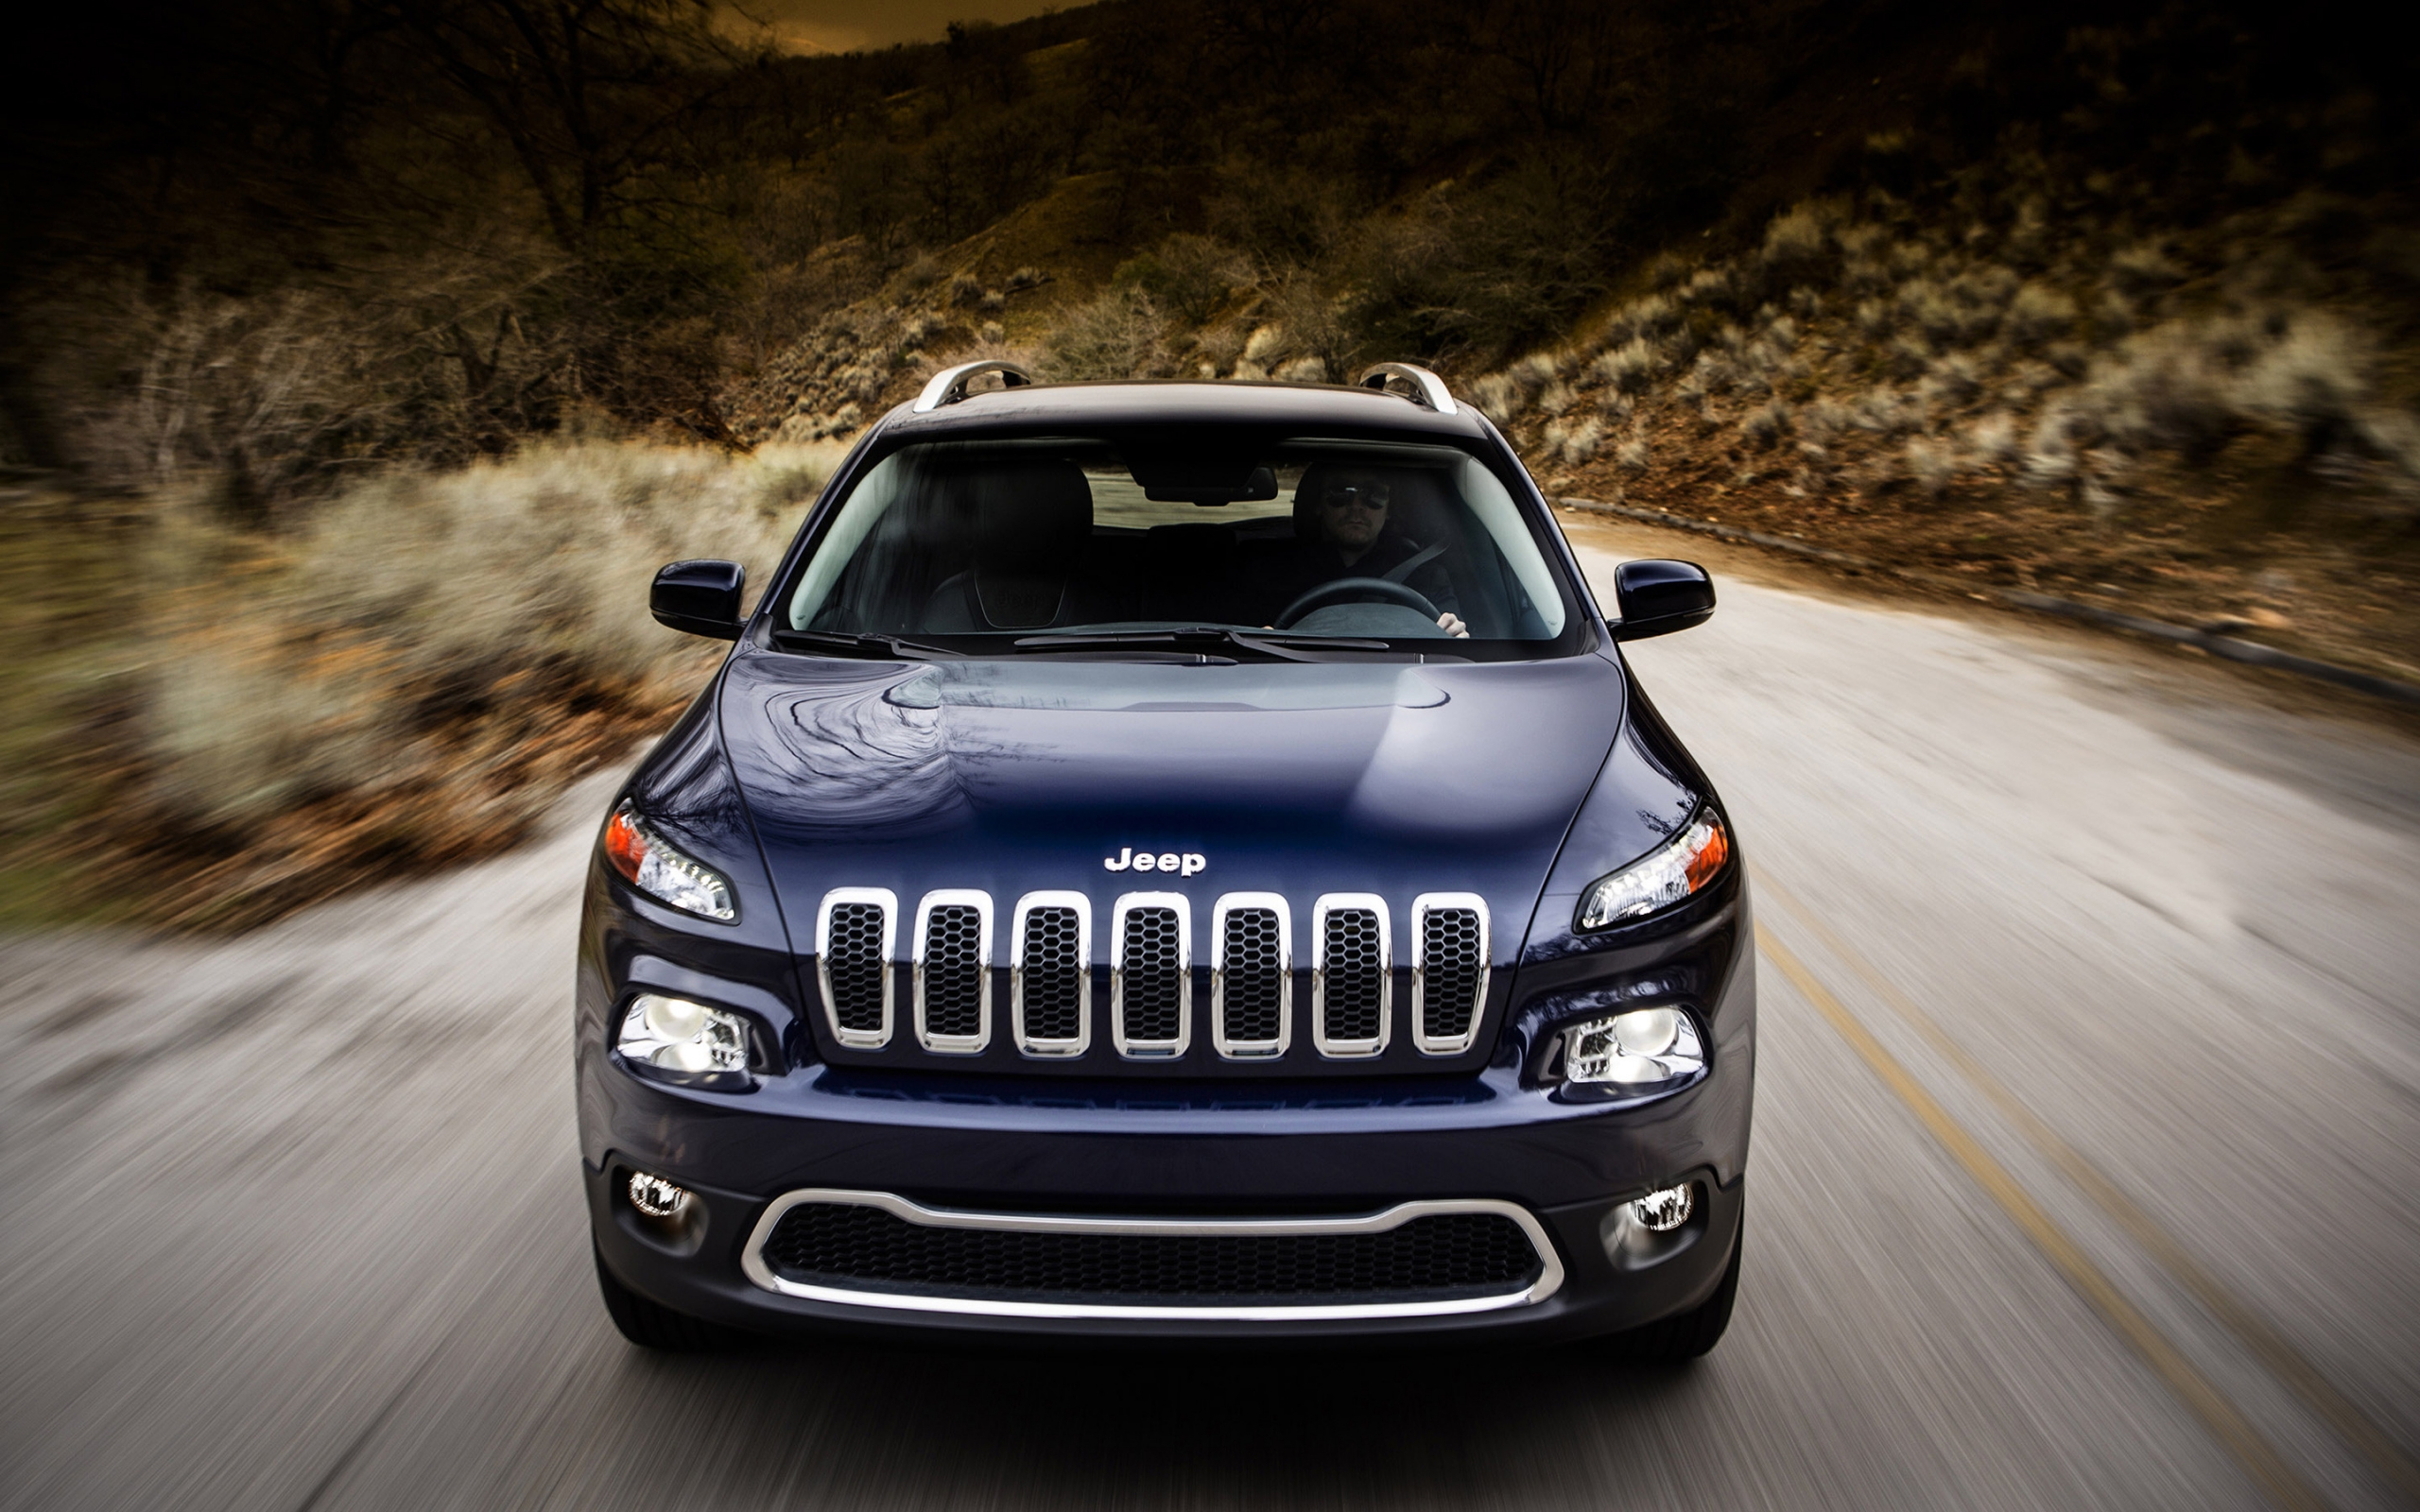 2014 Jeep Cherokee for 2560 x 1600 widescreen resolution